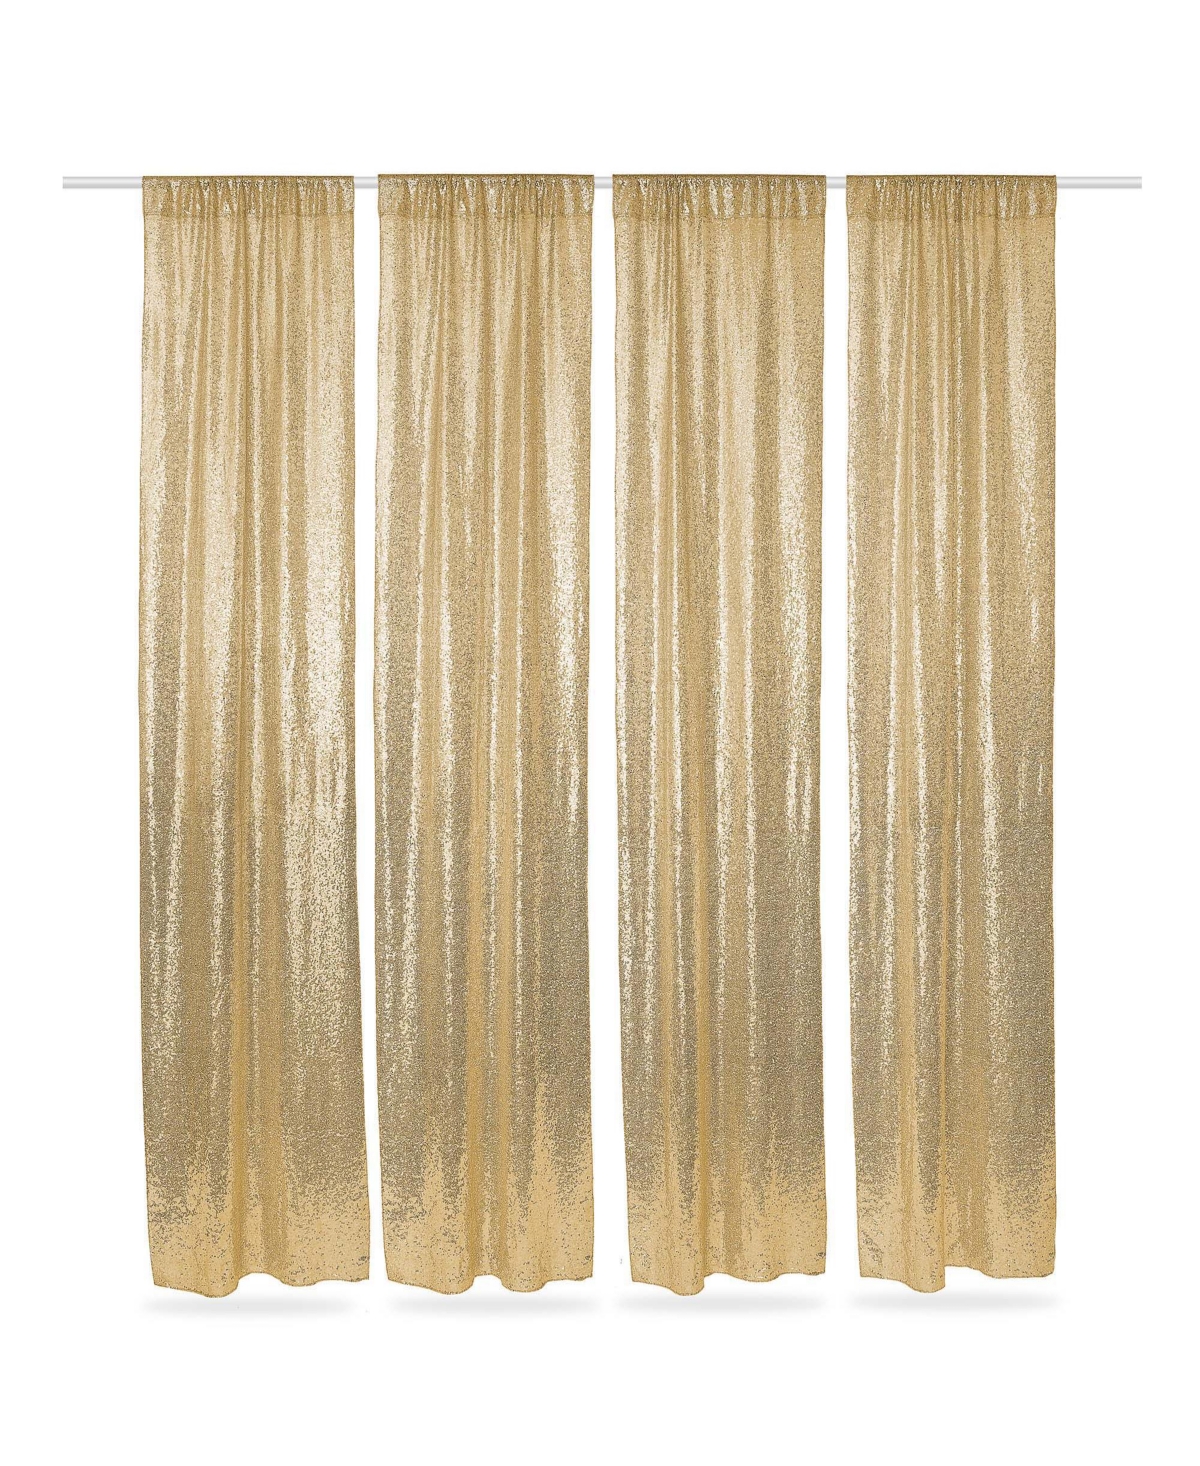 (Set of 4) Sequin Backdrop Curtains, 2ft x 8ft Rose Gold Glitter Backgrounds - Gold